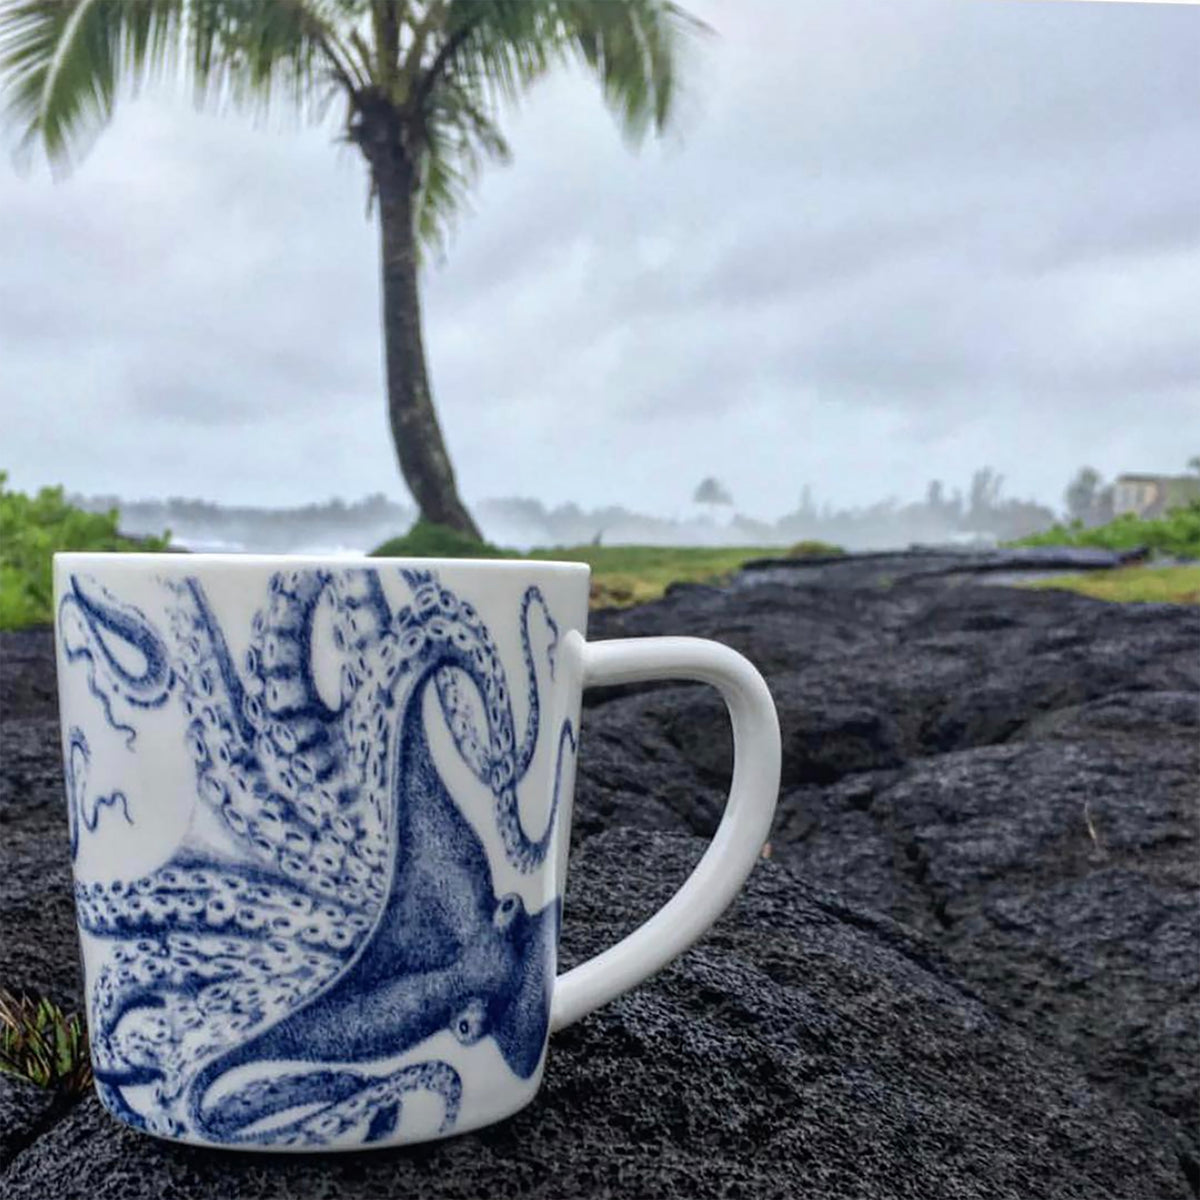 A premium porcelain *Lucy Mug* from *Caskata Artisanal Home* with a blue design sits on a rocky surface, its backdrop featuring a blurred palm tree and an overcast sky. Dishwasher and microwave safe, this elegant piece adds charm to any setting.